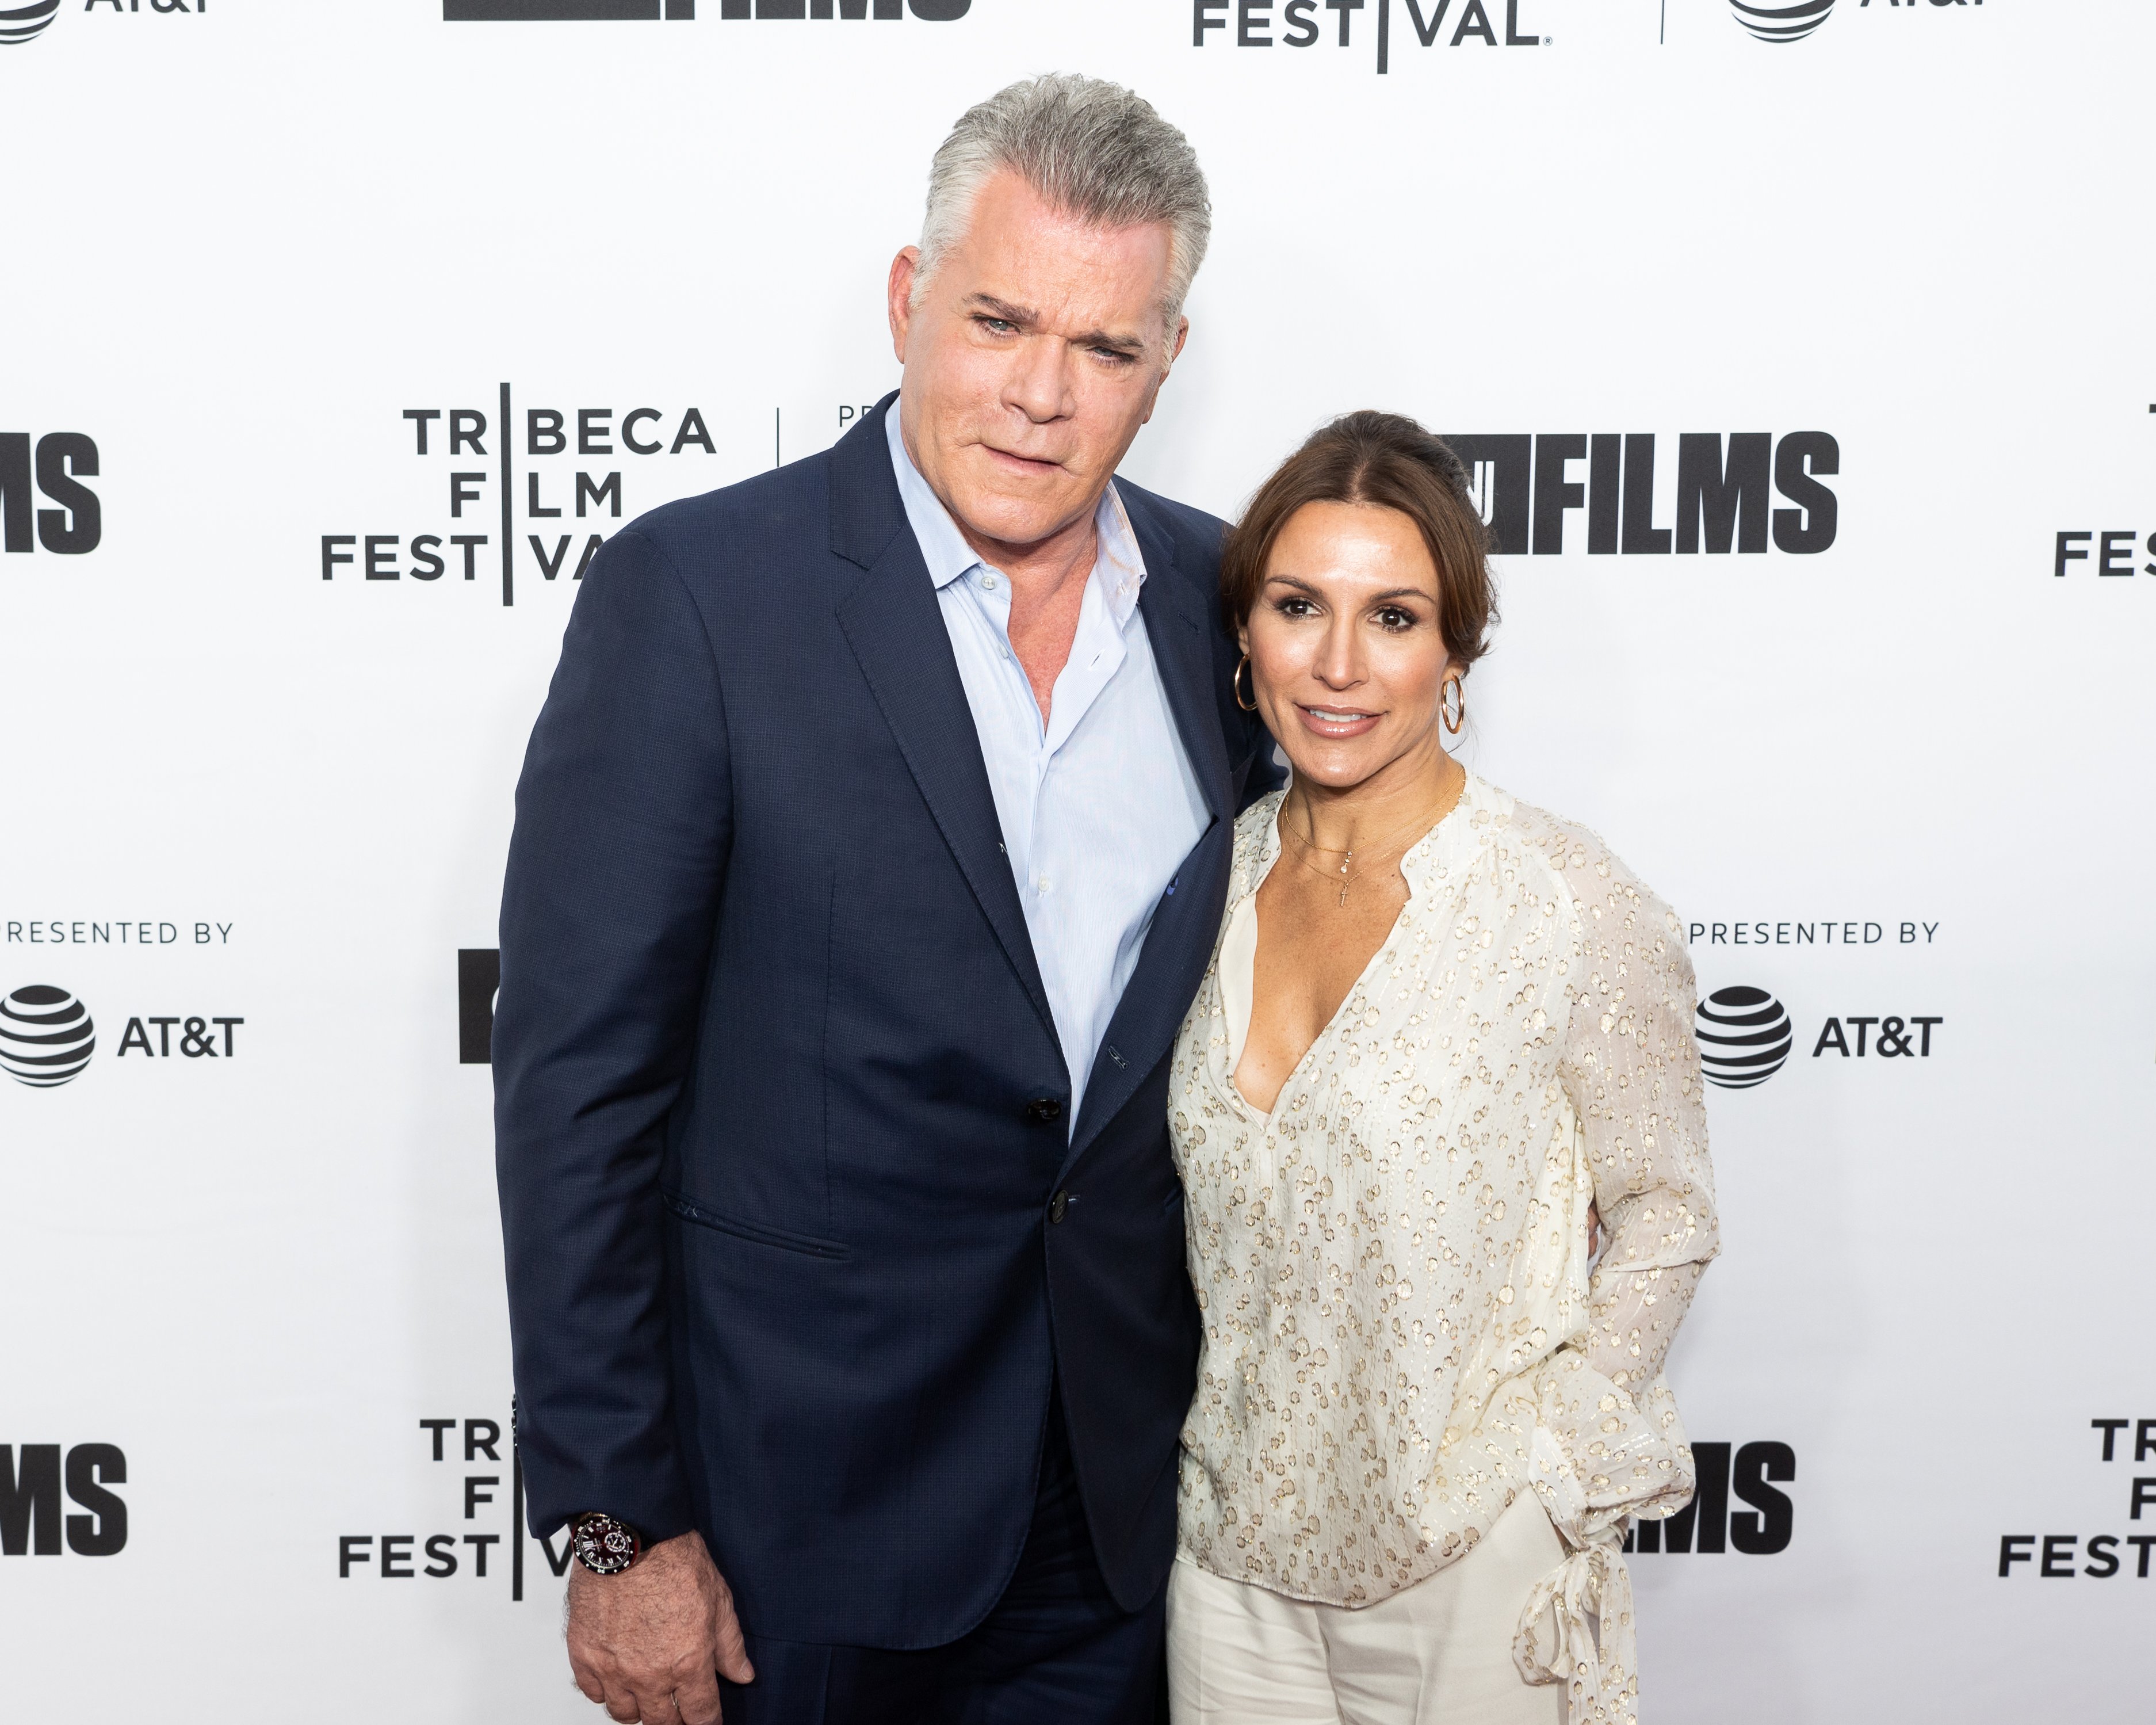 Ray Liotta and Silvia Lombardo at the Tribeca Film Festival for the film "Love, Gilda" in New York, on April 18, 2018. | Source: Michael Brochstein/SOPA Images/LightRocket/Getty Images